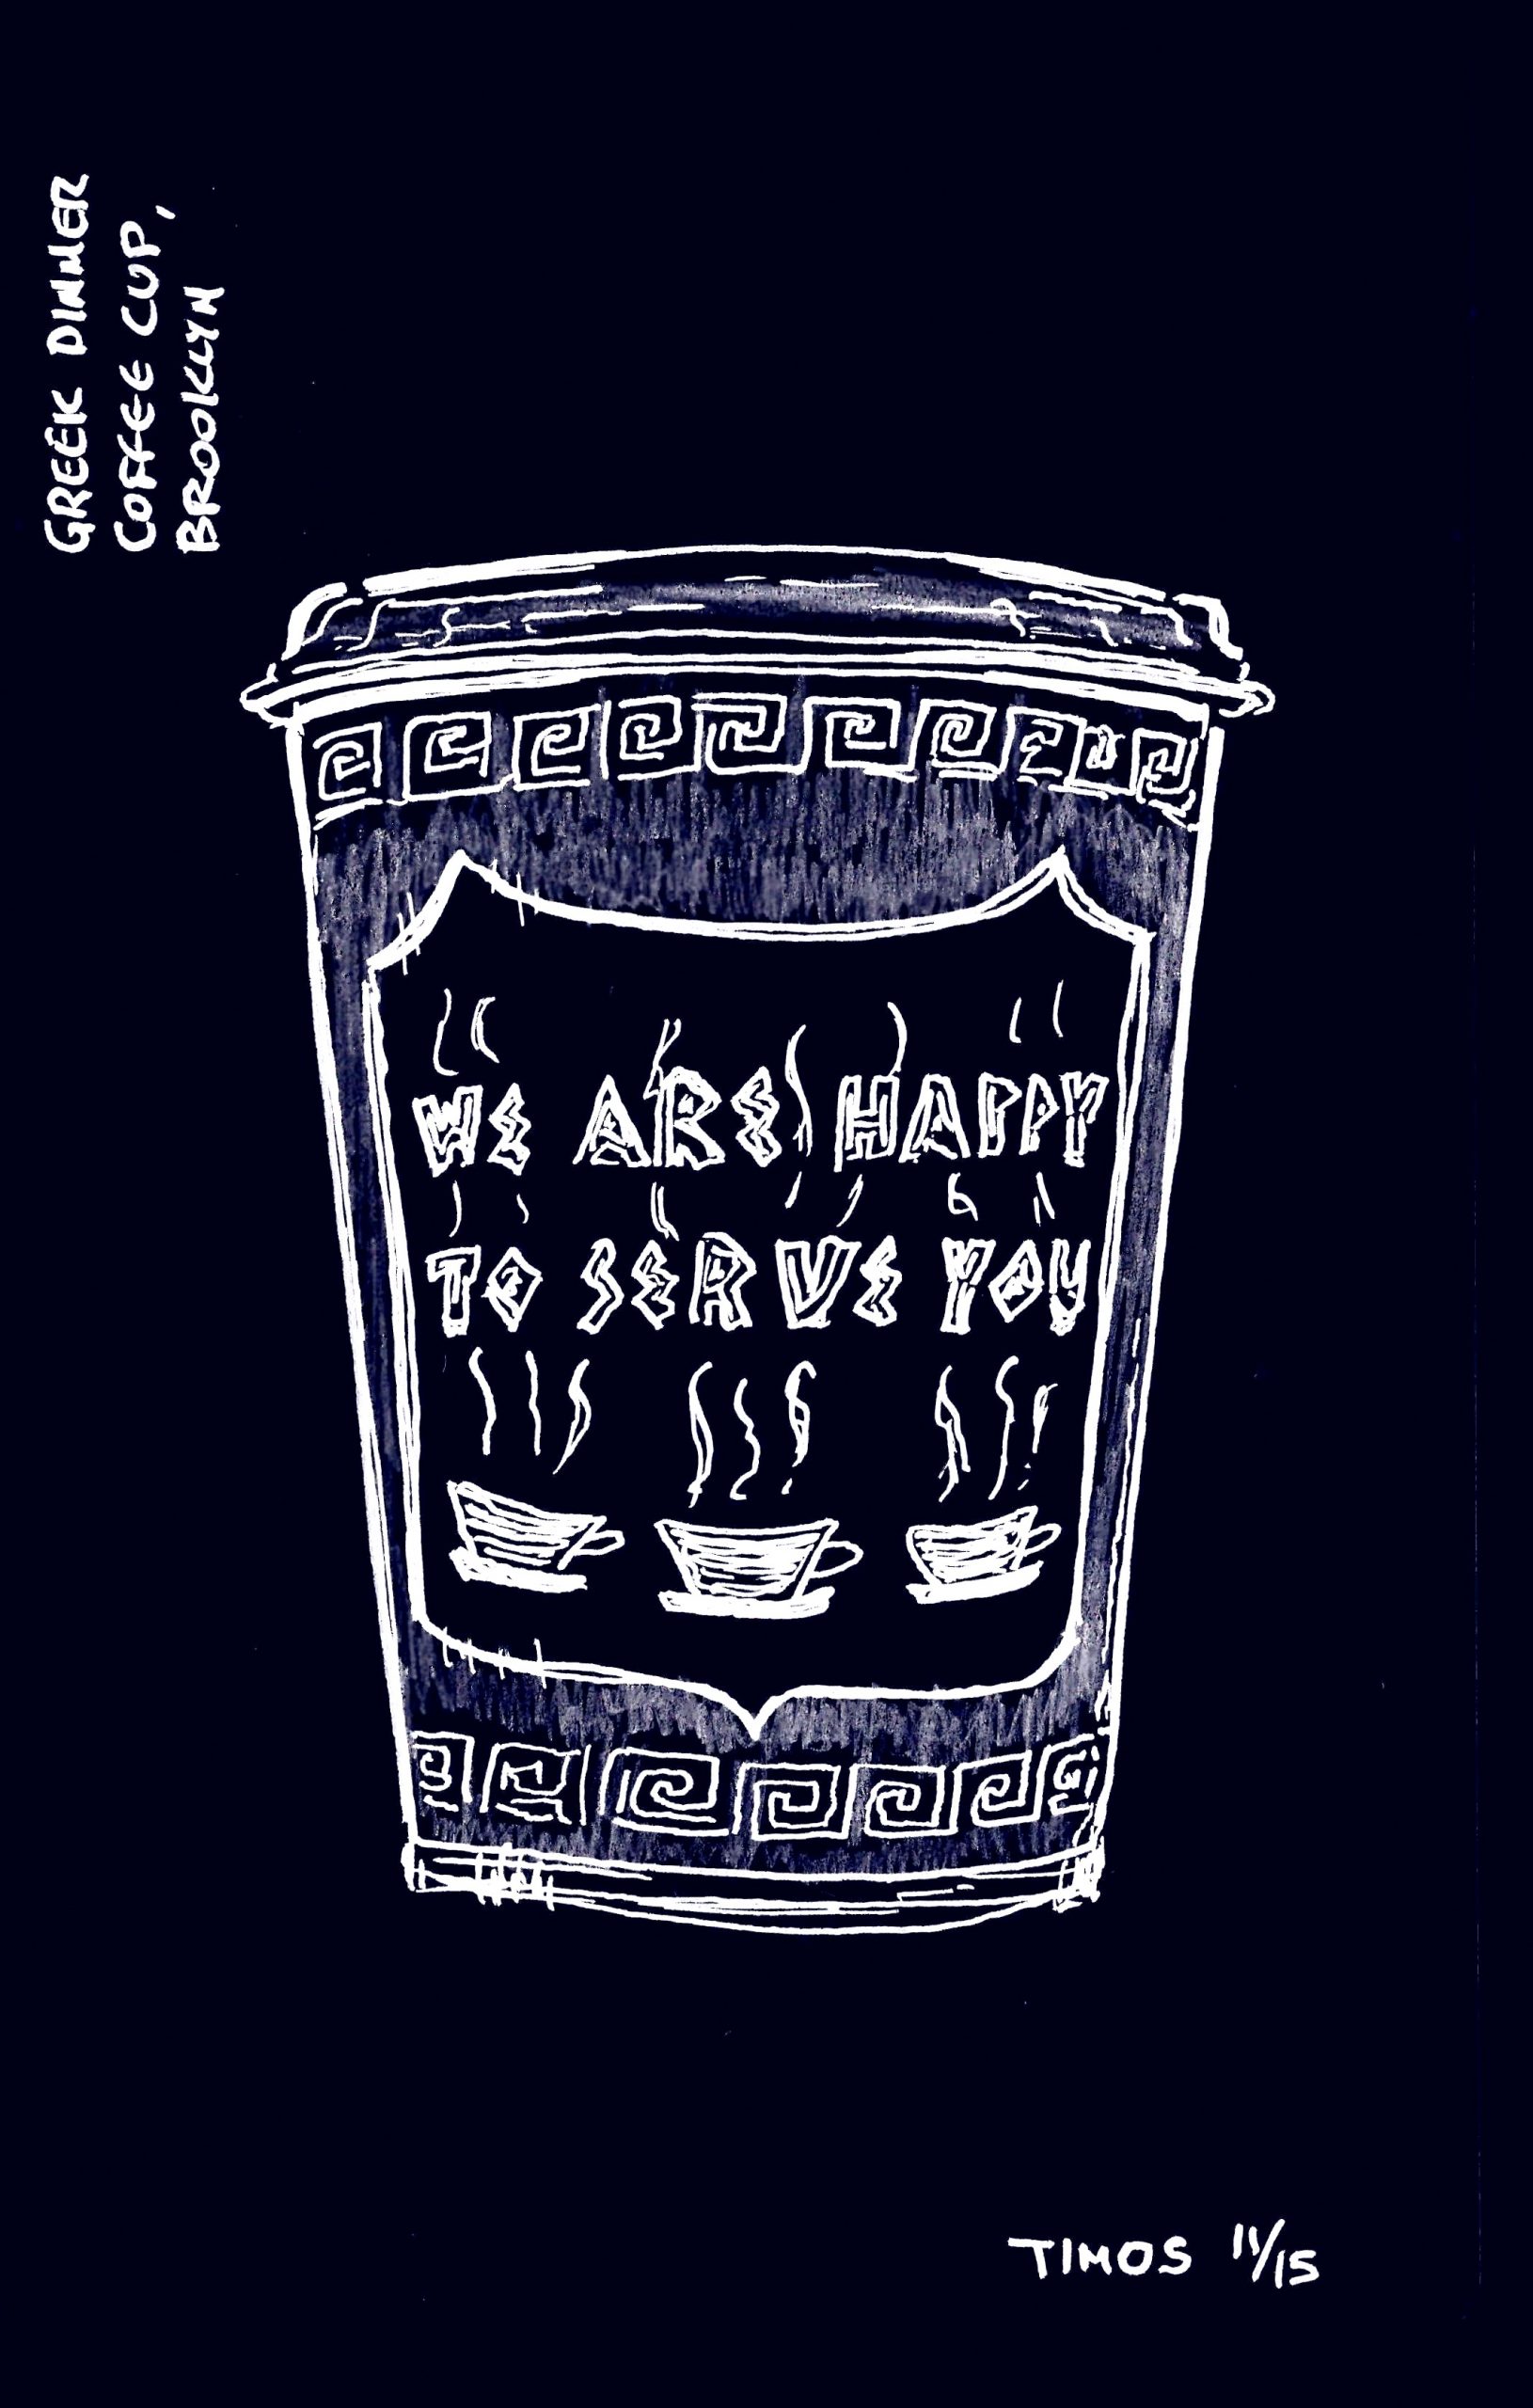 Greek coffee cup – a NYC icon